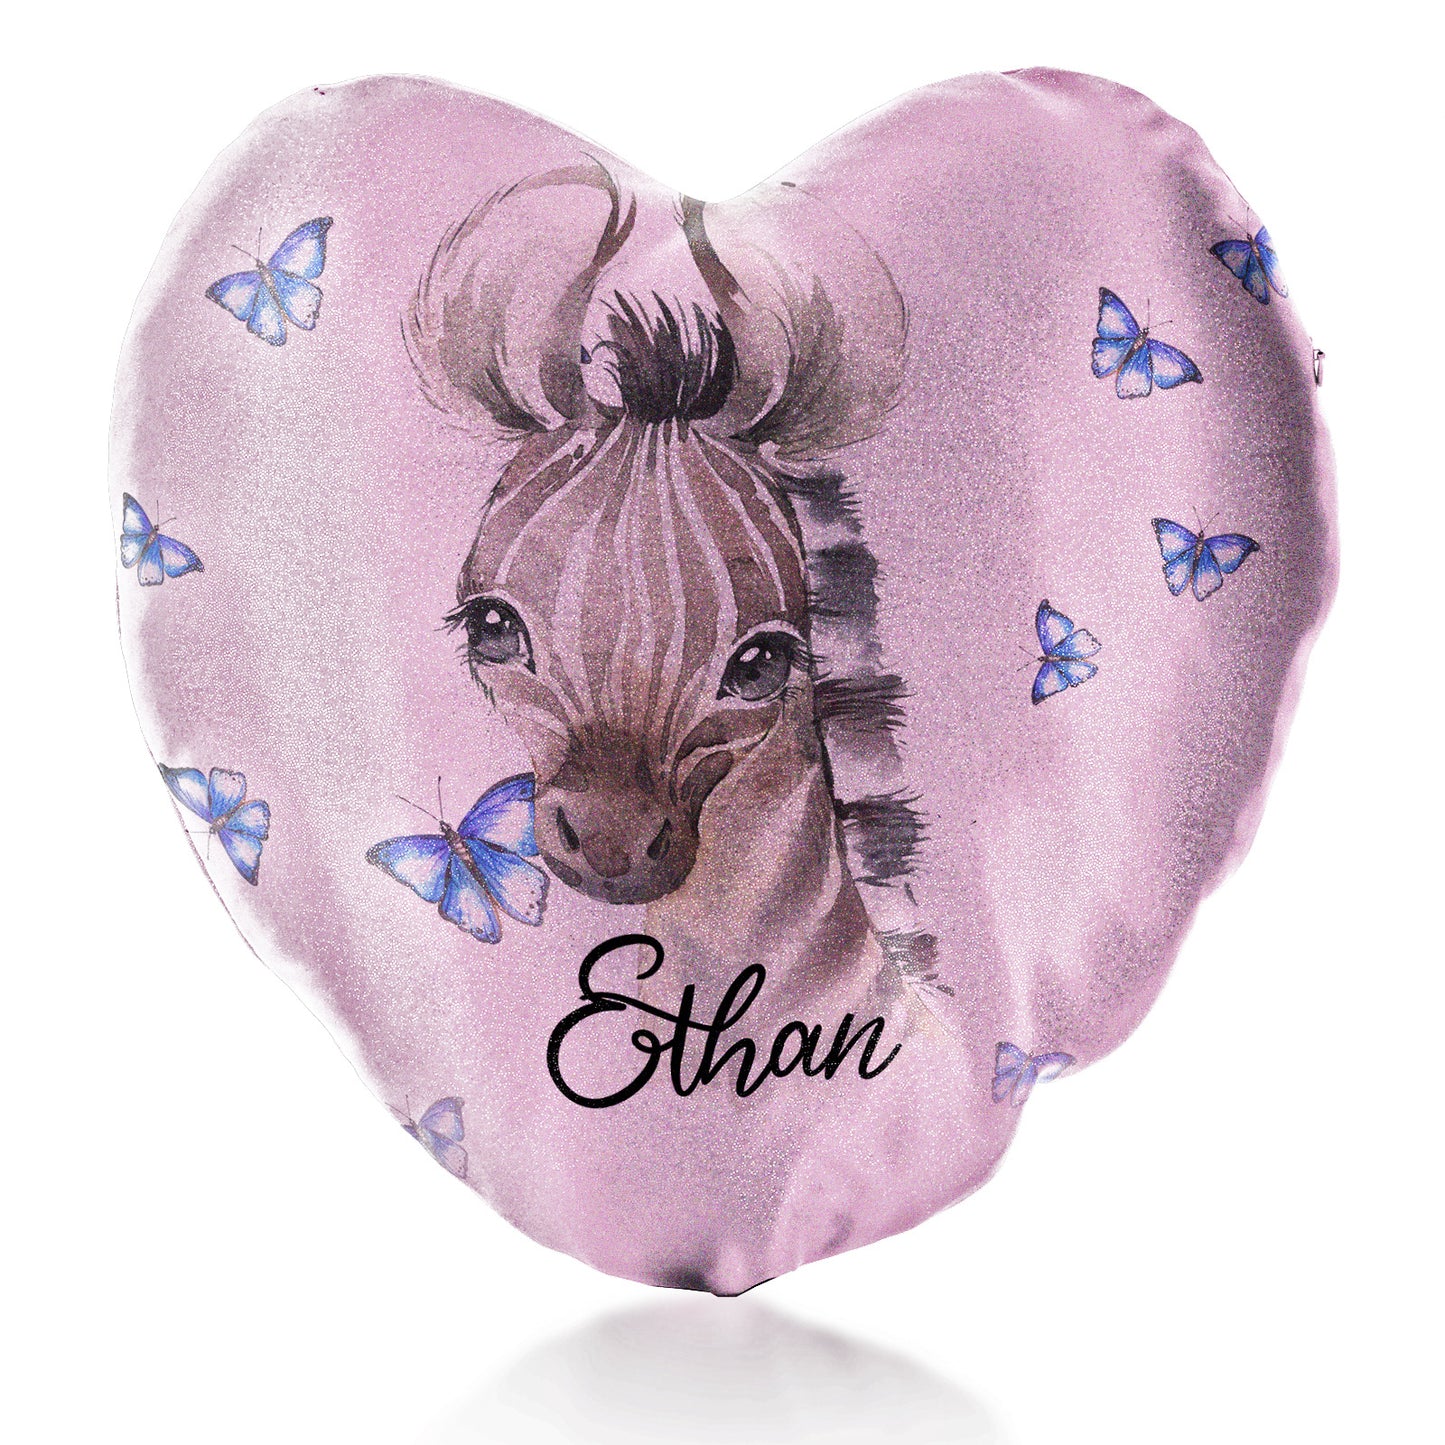 Personalised Glitter Heart Cushion with Zebra Blue Butterfly and Cute Text